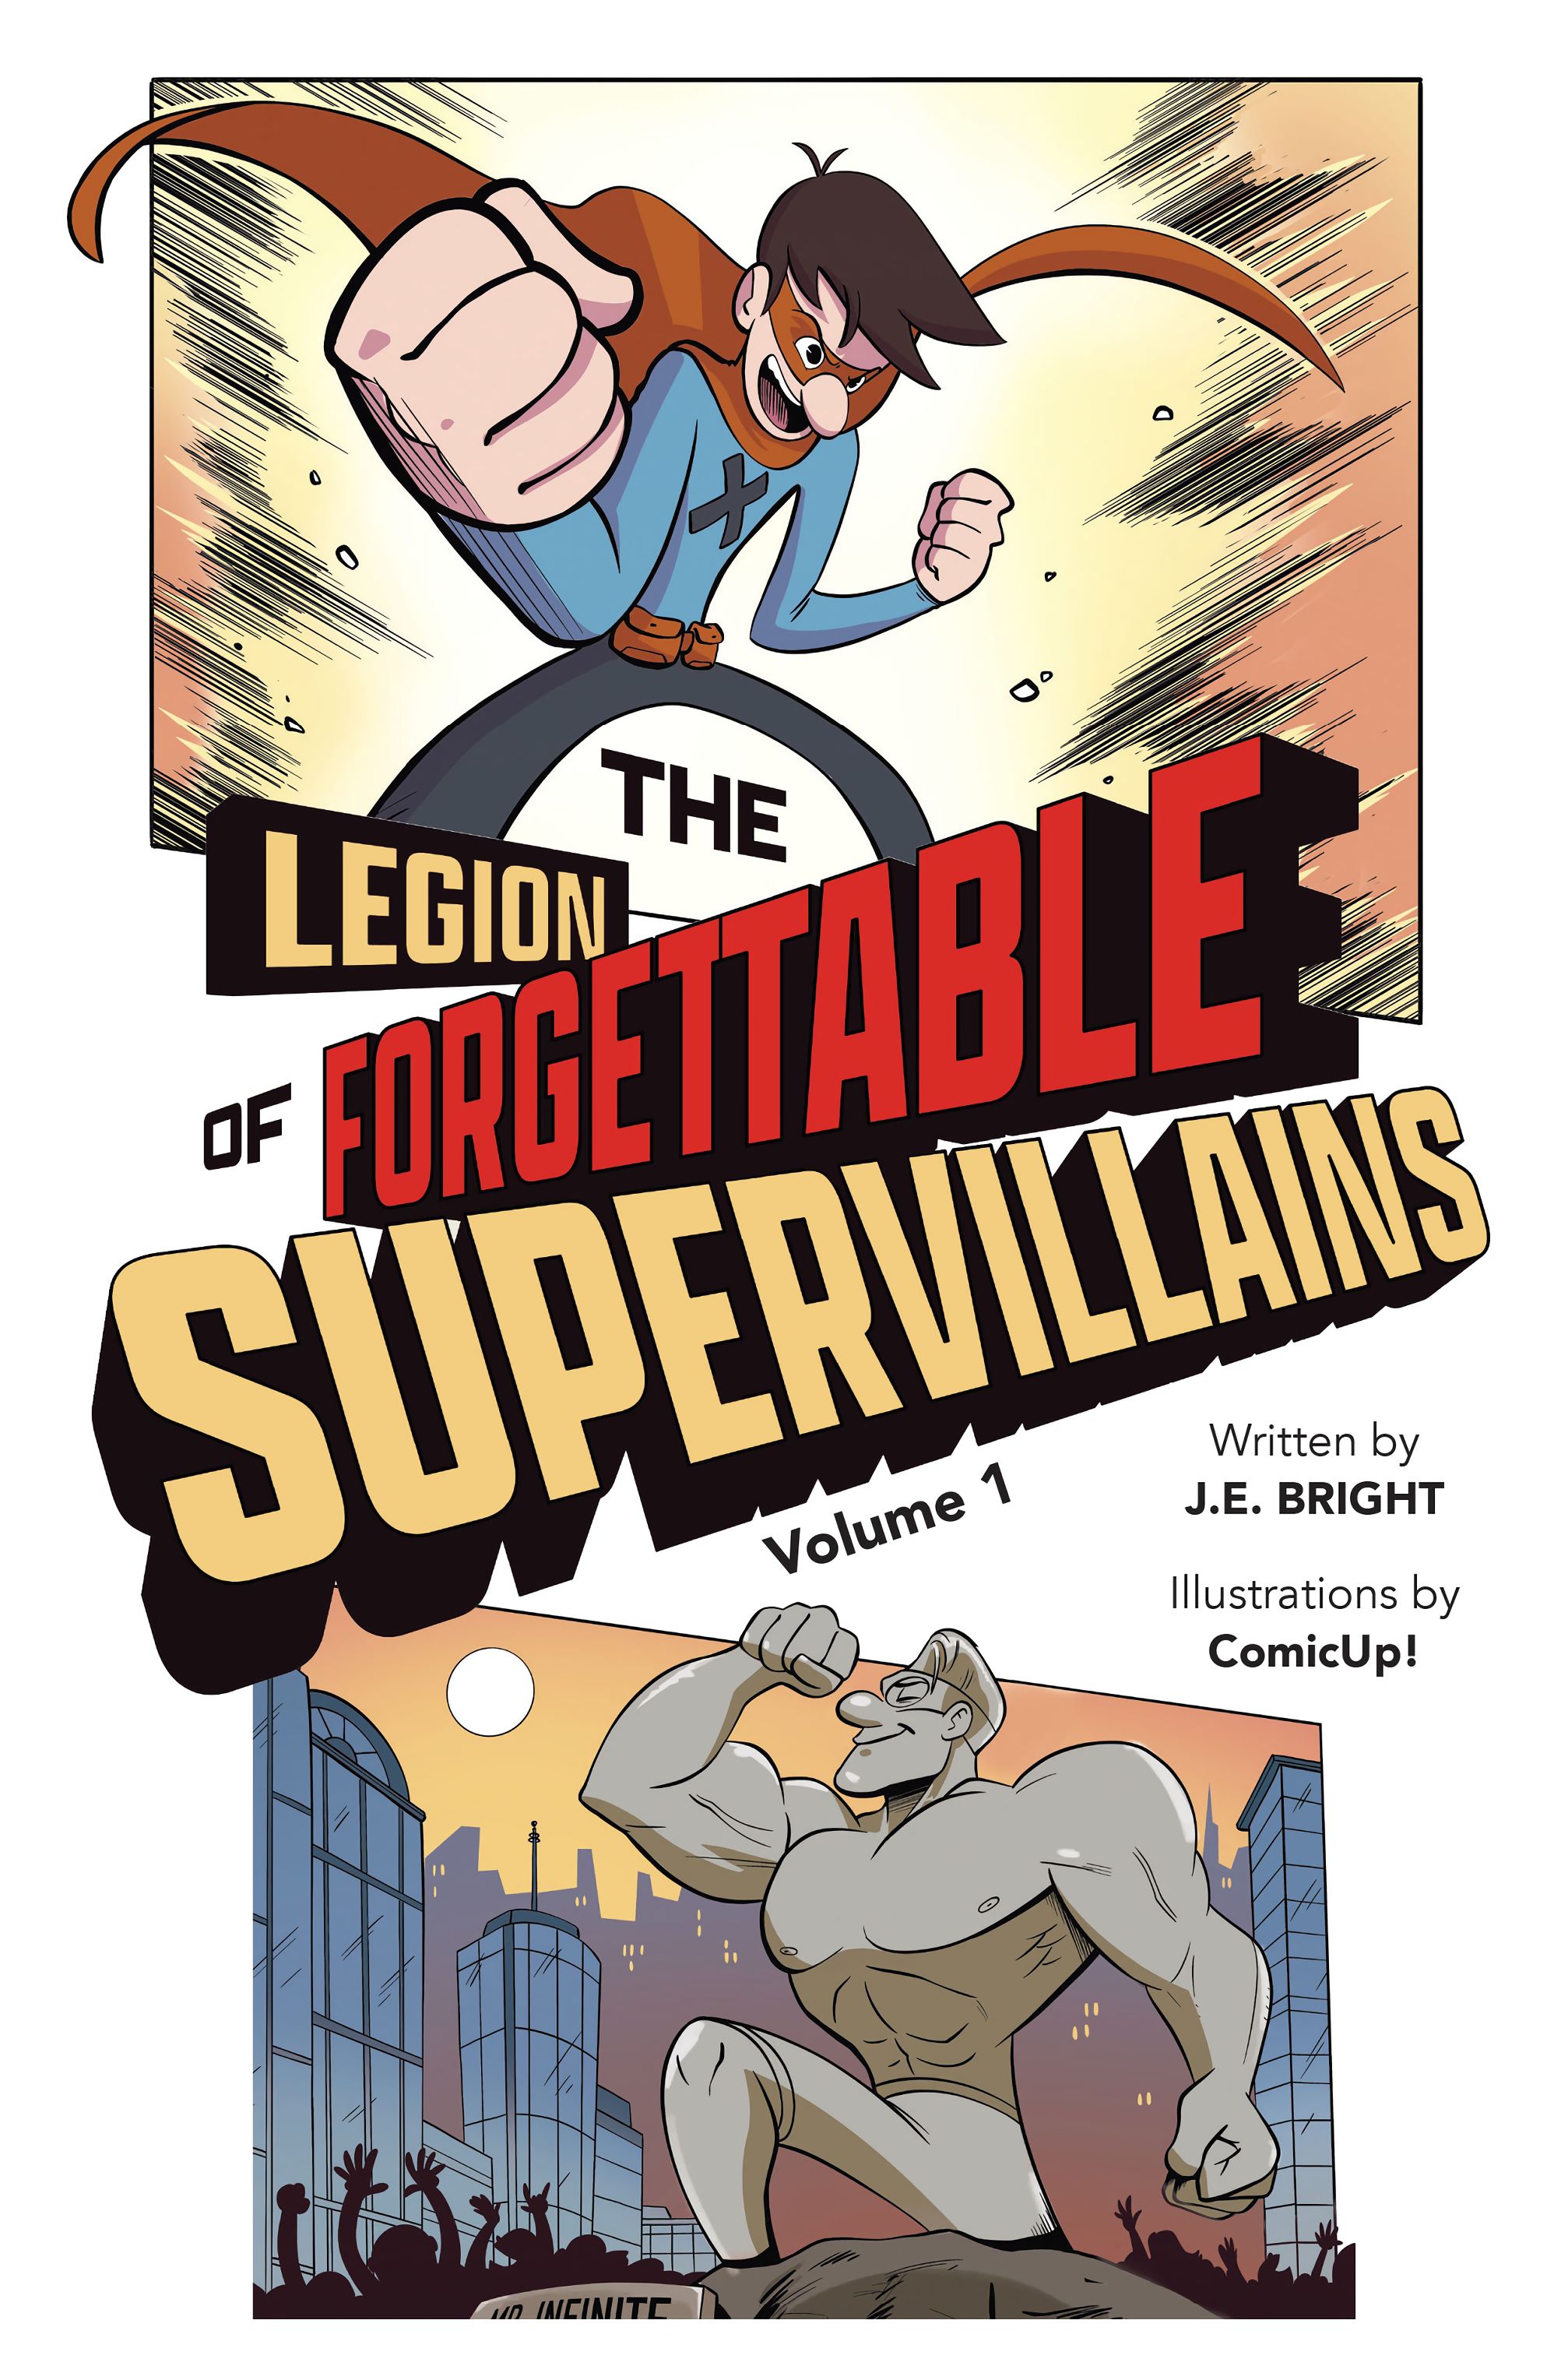 Read online The Legion of Forgettable Supervillians comic -  Issue # TPB - 3